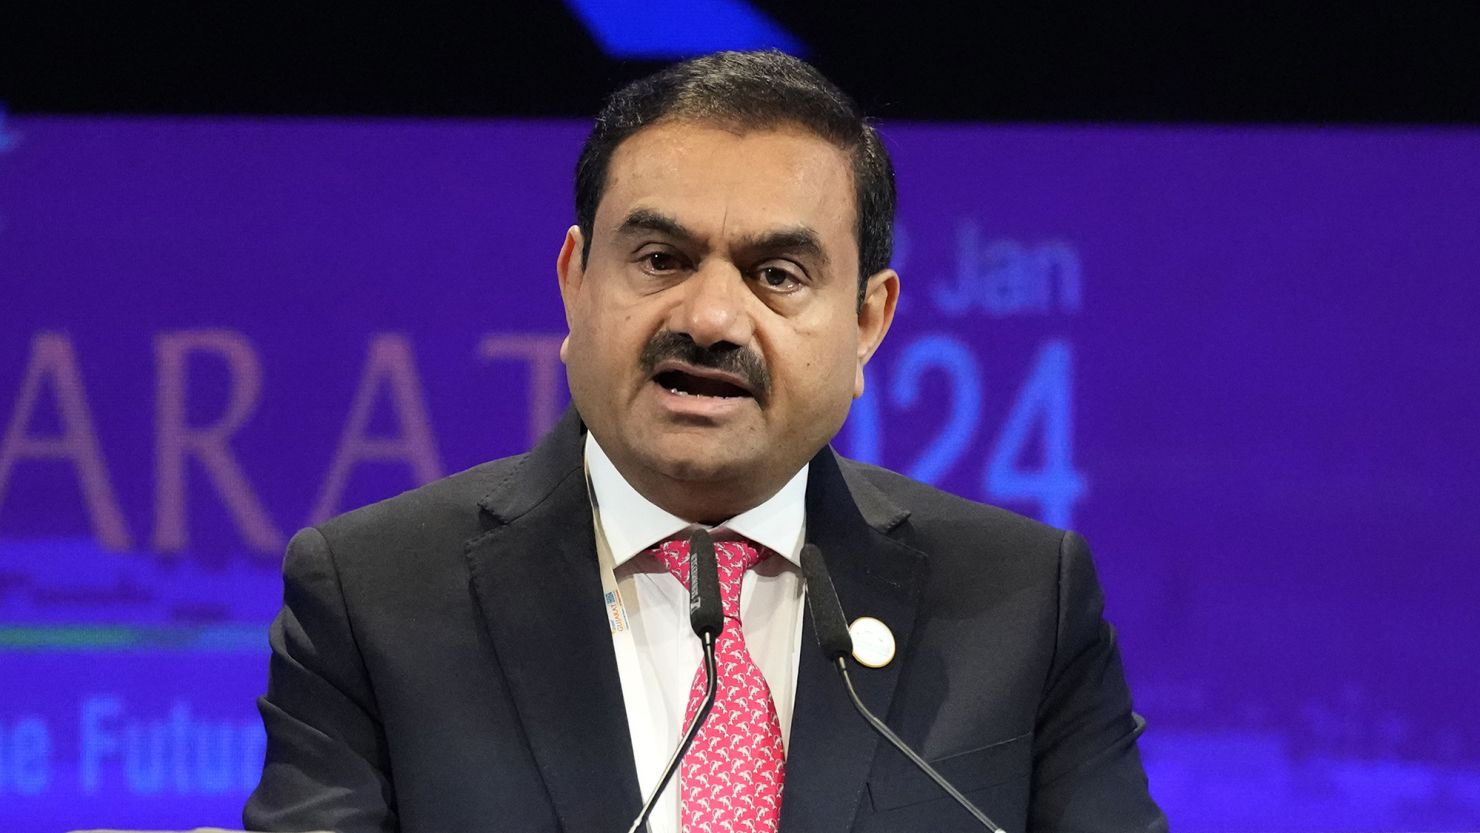 Gautam Adani addresses the Vibrant Gujarat Global Summit, a business event to attract investments to the Gujarat state, in Gandhinagar.